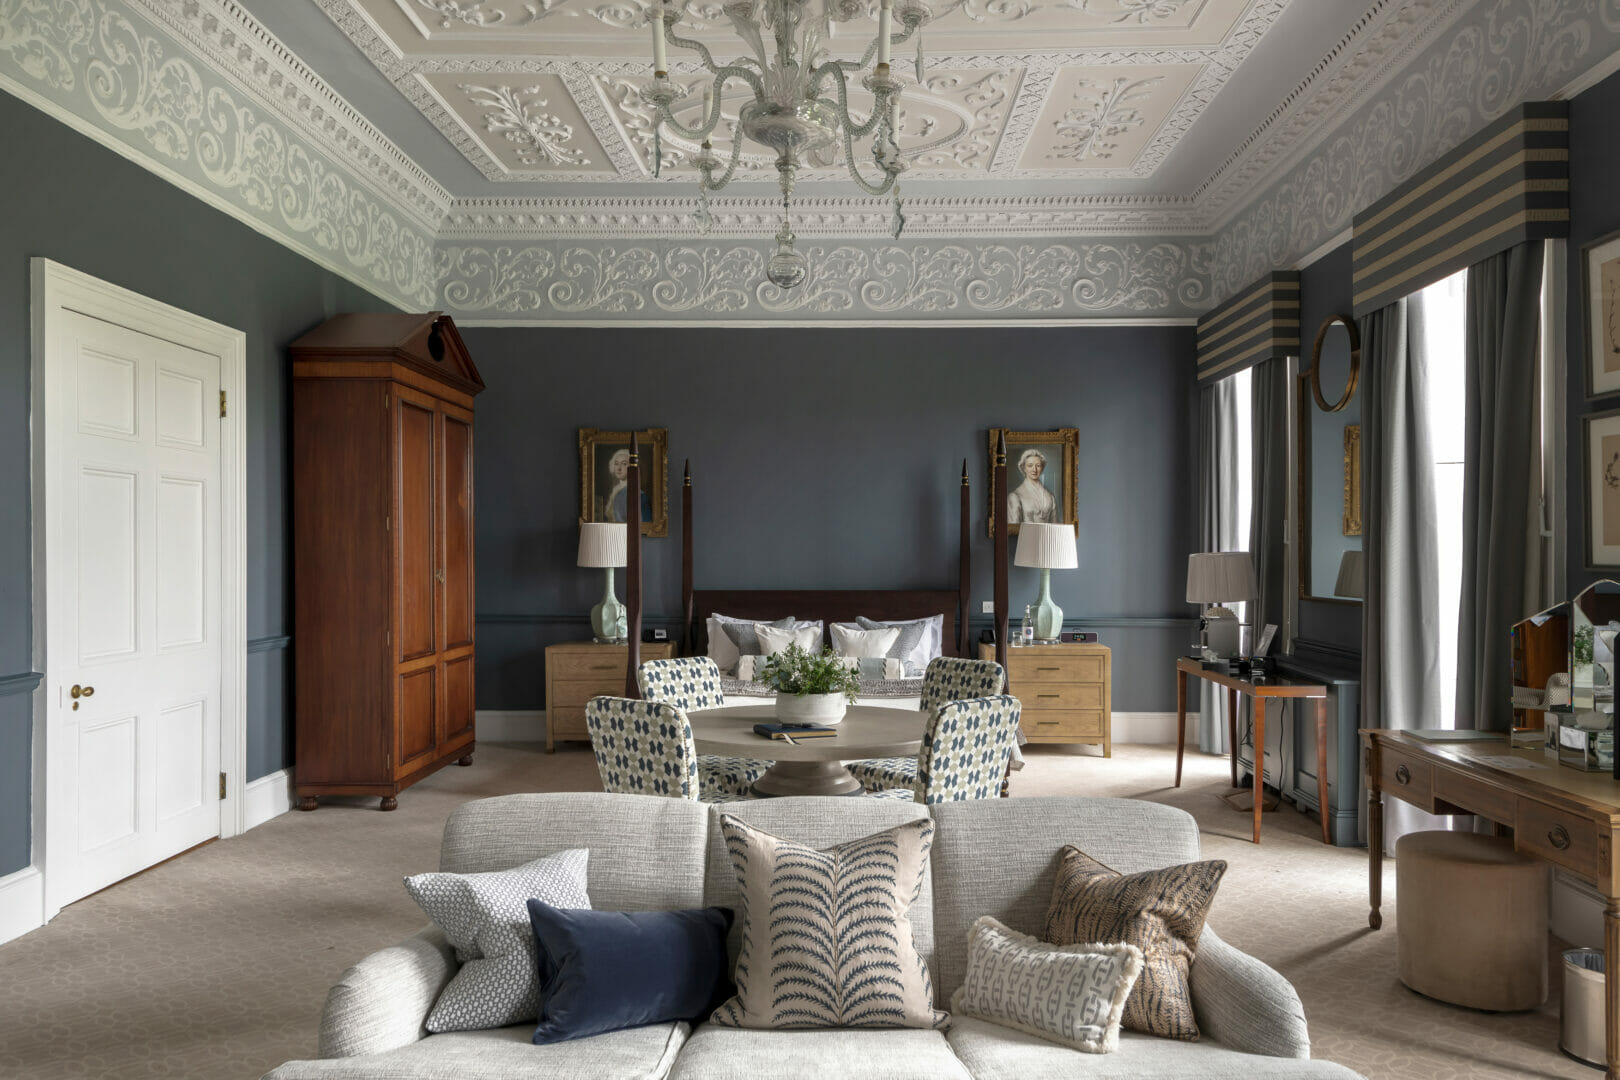 THE ROYAL CRESCENT HOTEL & SPA UNVEIL 11 NEWLY REFURBISHED CONTEMPORARY DESIGNER SUITES